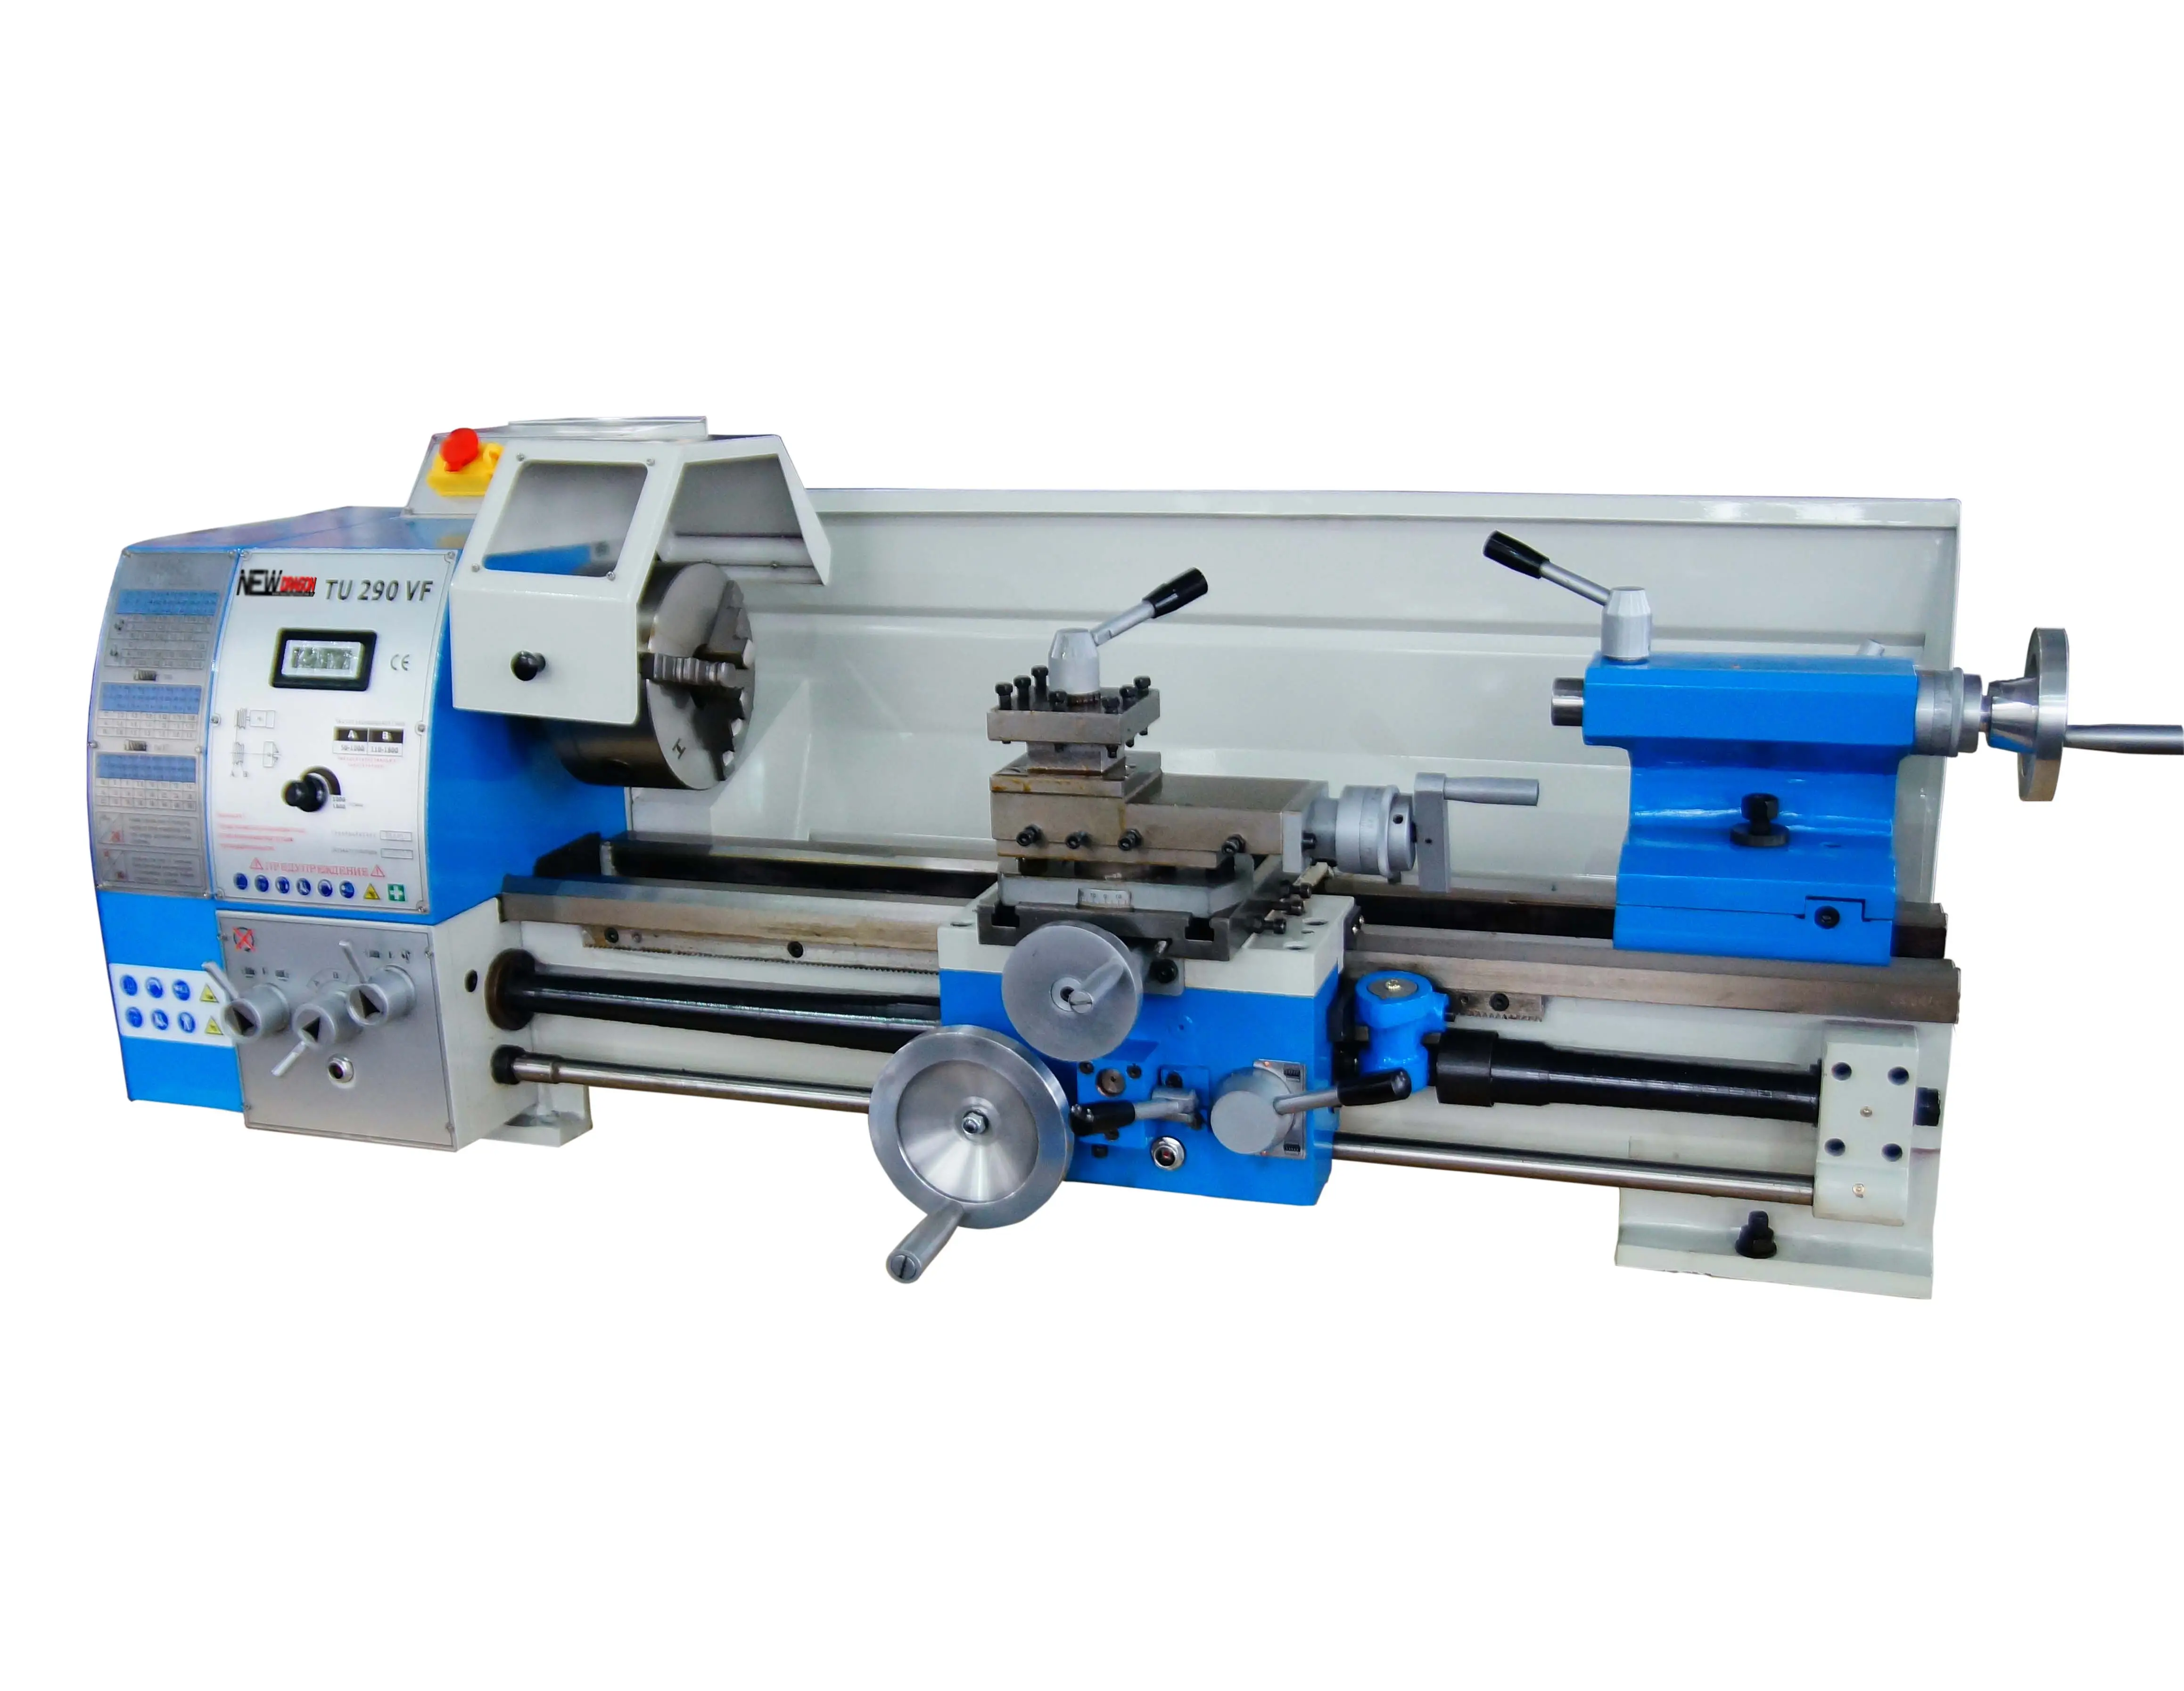 New type metal bench lathe with double rods D290X700V-F